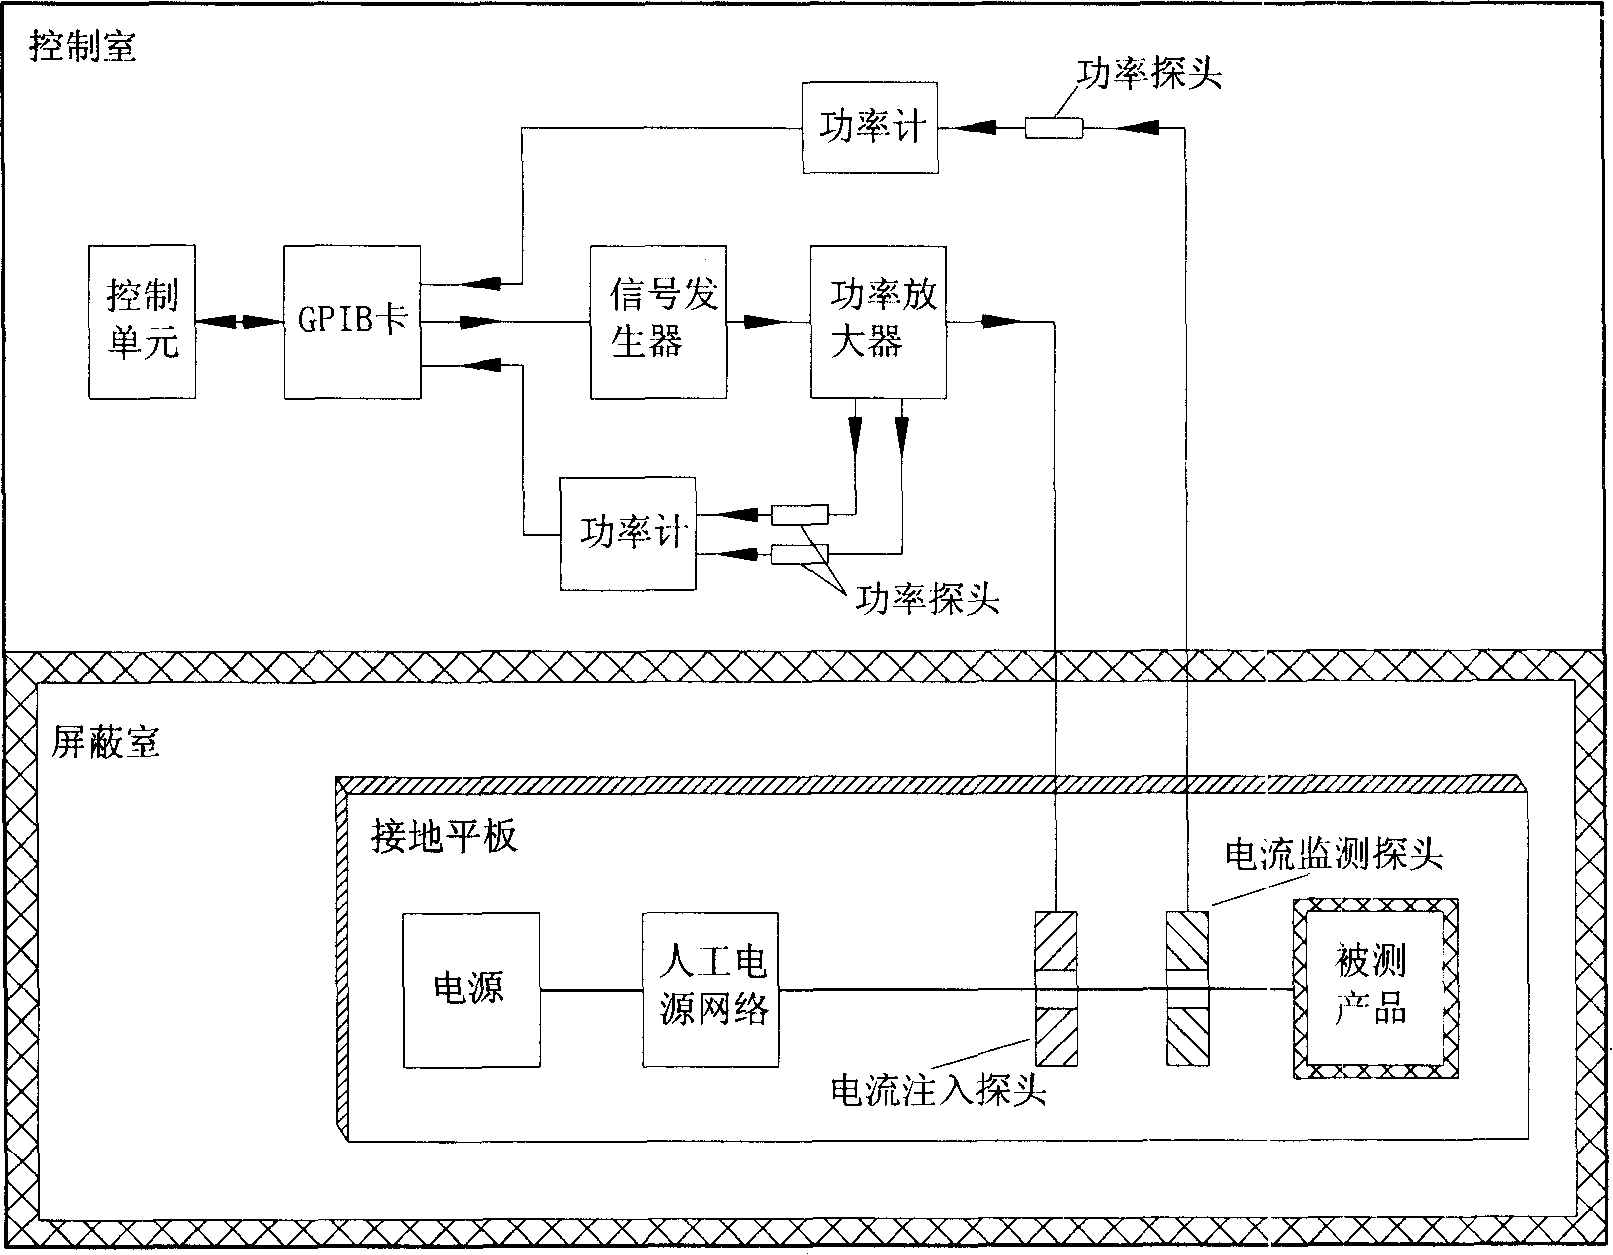 Apparatus and method for testing automobile electromagnetic sensitivity